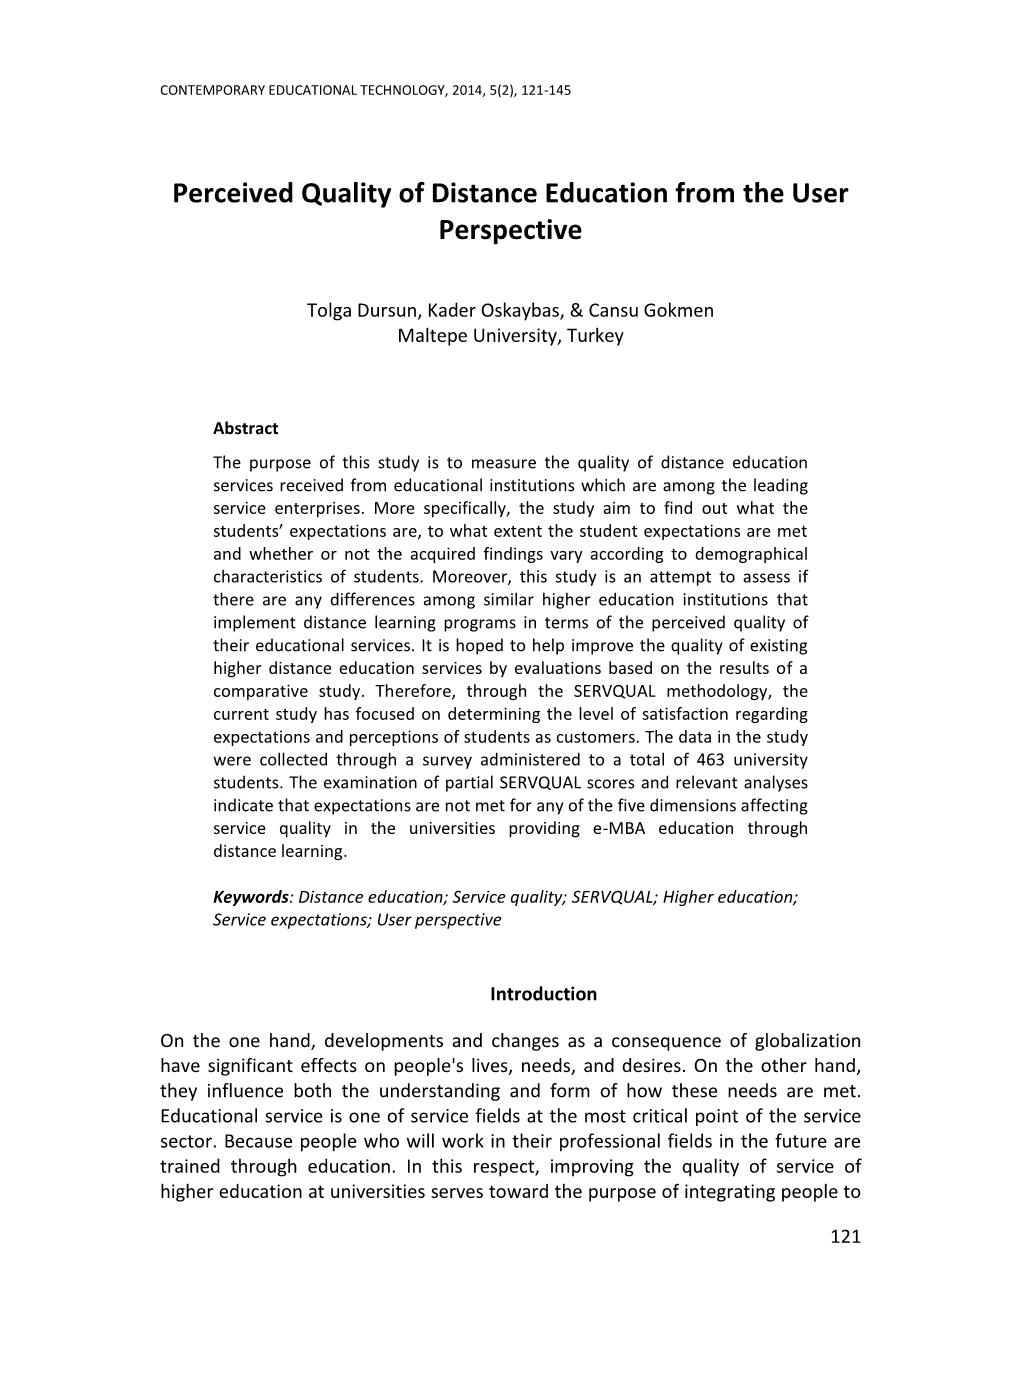 Perceived Quality of Distance Education from the User Perspective